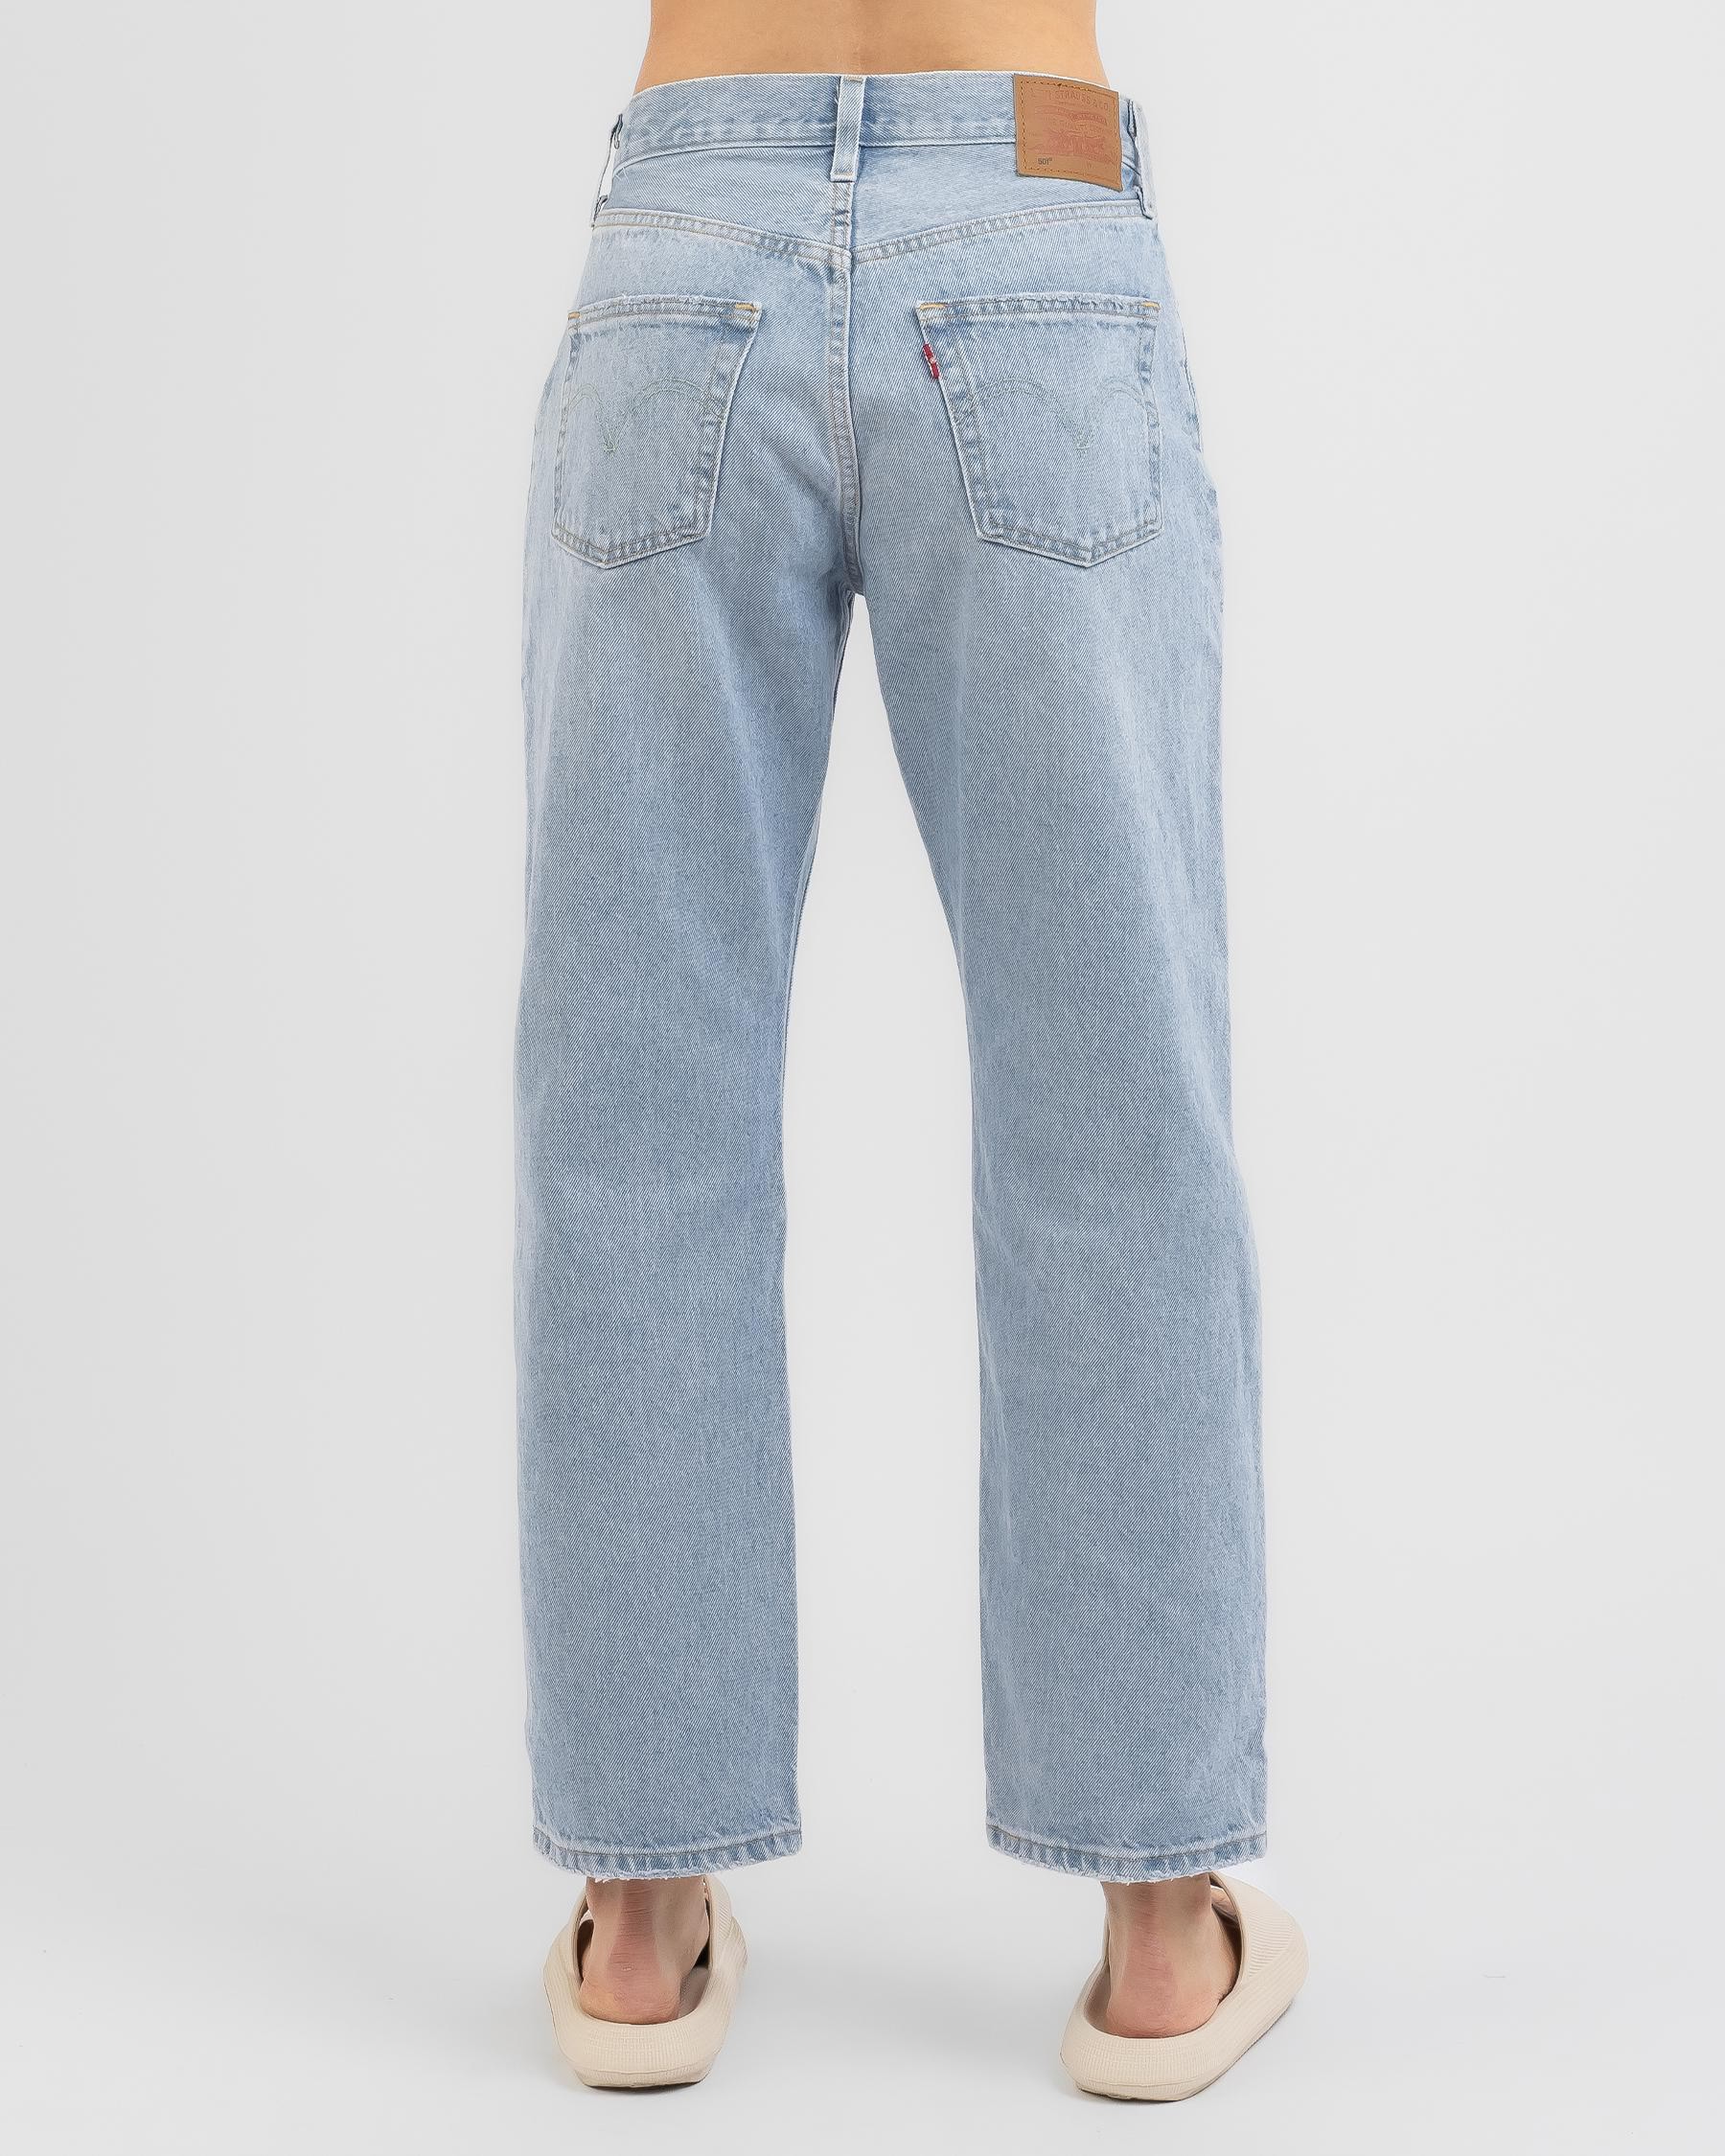 Shop Levi's 90's 501 Jeans In Ever Afternoon - Fast Shipping & Easy ...